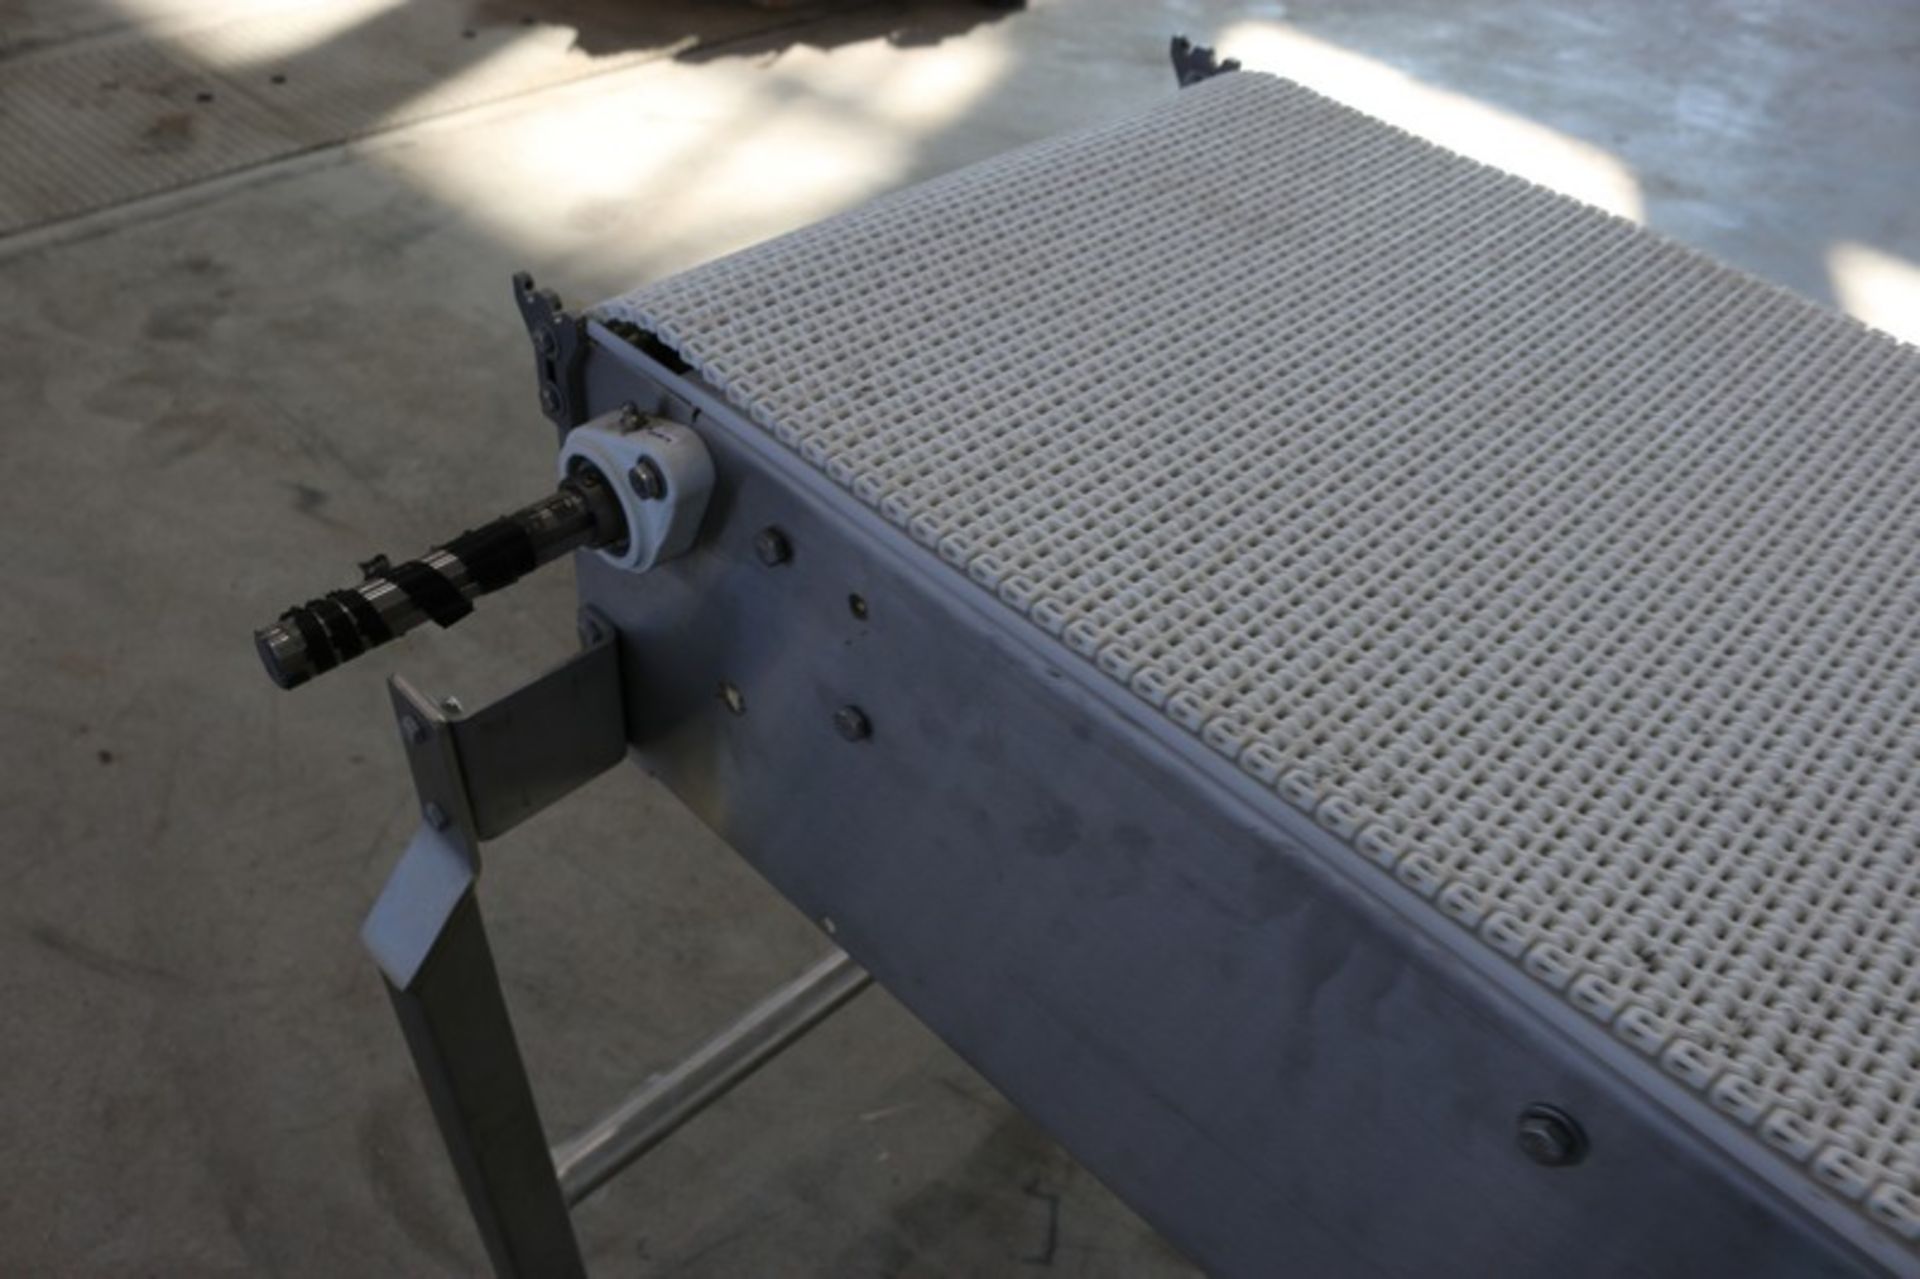 Straight Section of S/S Conveyor, with White Interlock Belt, Aprox. 55" L x 18" H Belt, Mounted on - Image 6 of 8